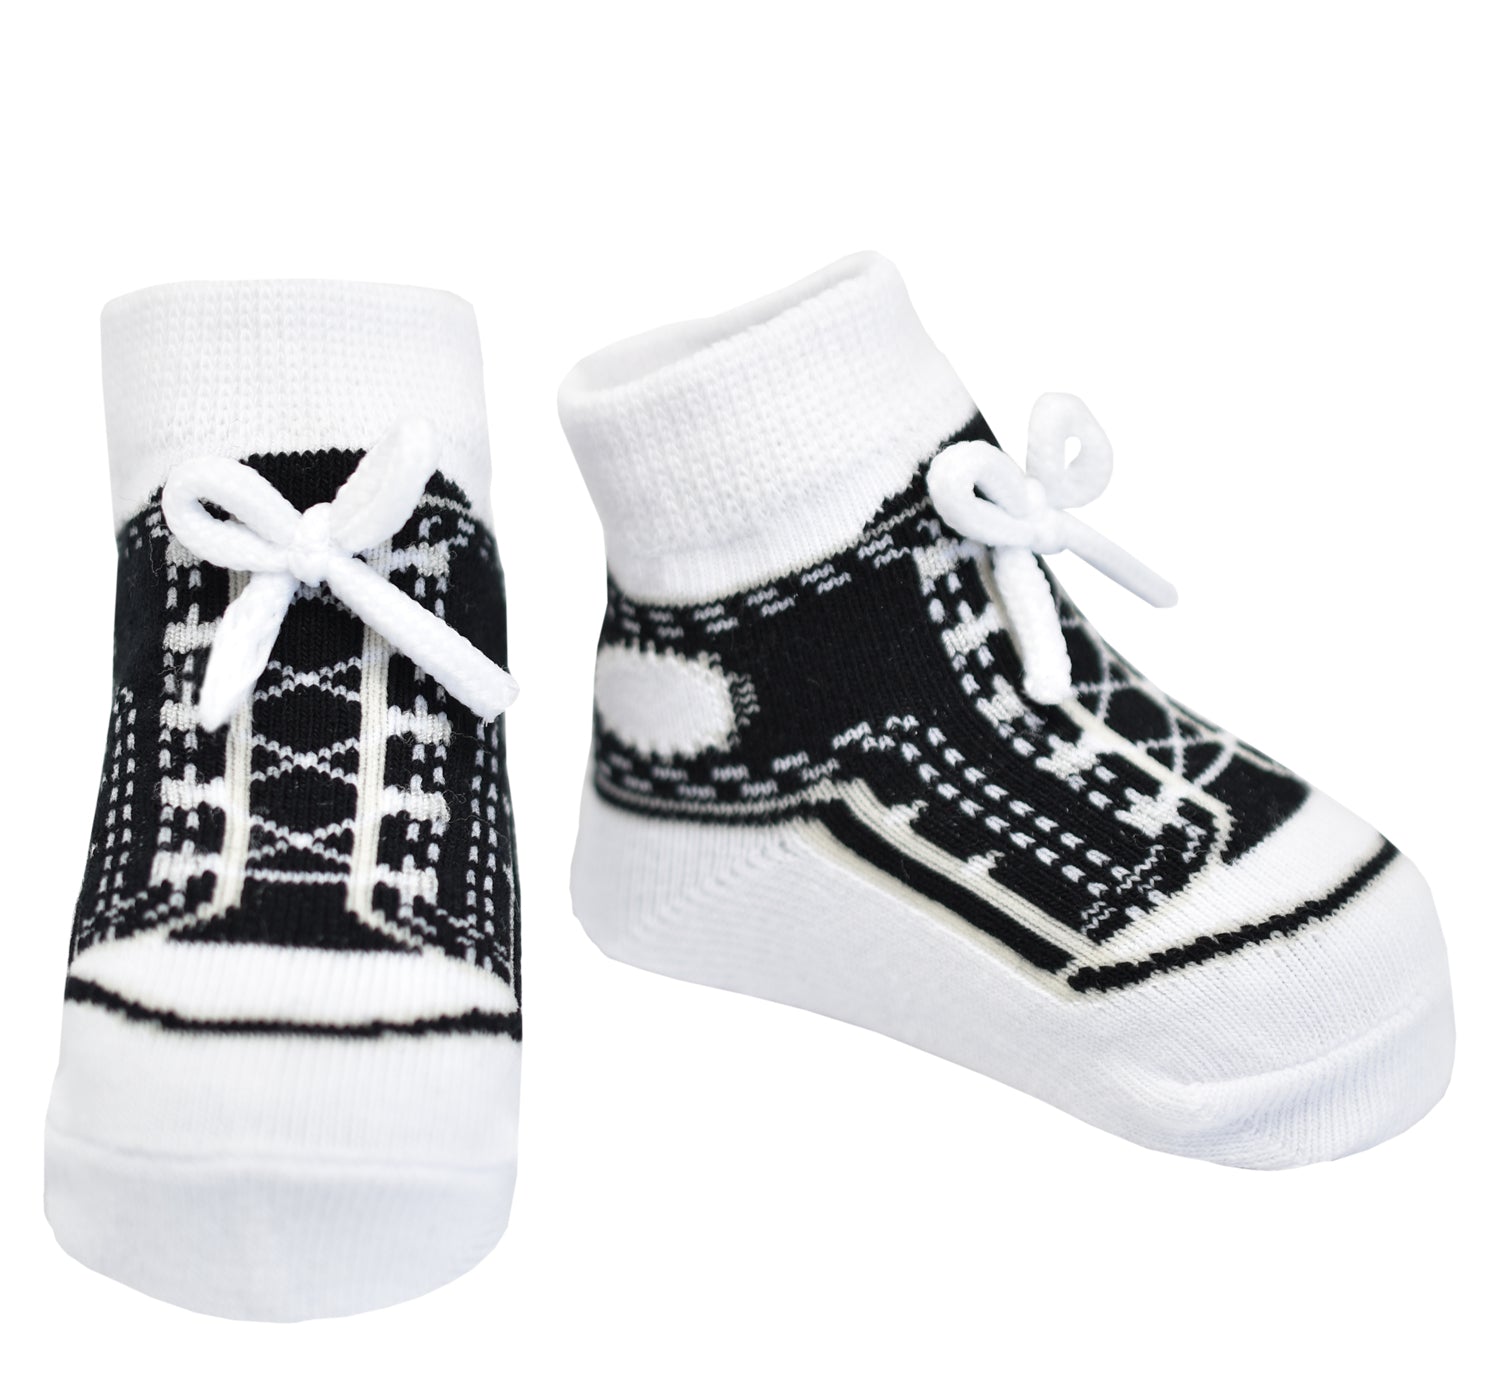 Baby socks black sneaker with faux shoe laces a baby shower gift